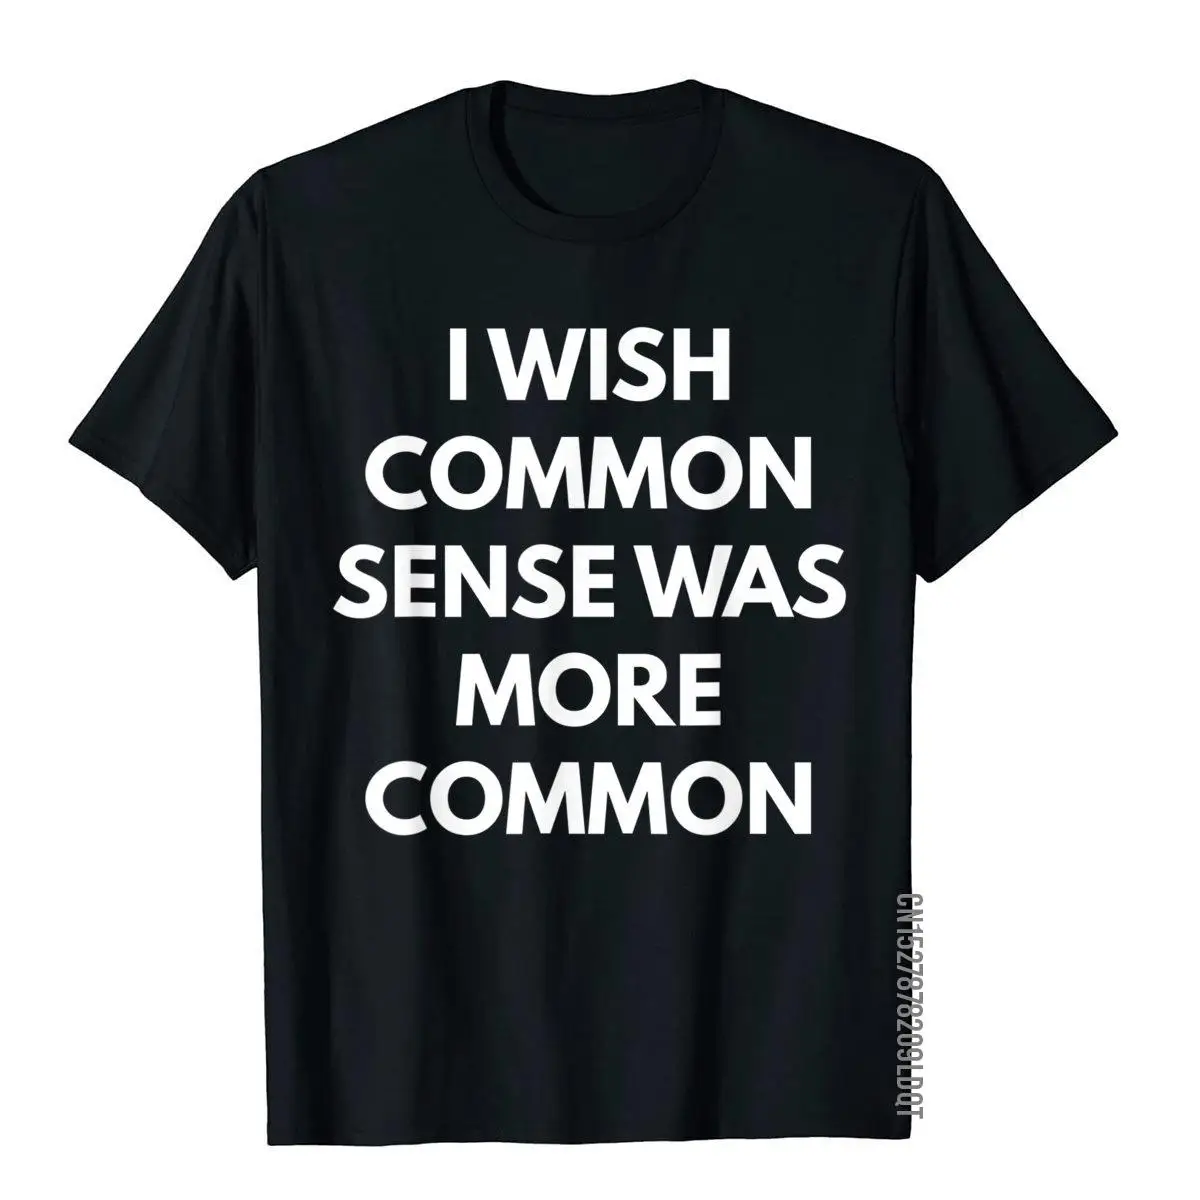 

I Wish Common Sense Was More Common T-Shirt Funny T Shirt For Men Brand New Cotton Top T-Shirts Normcore